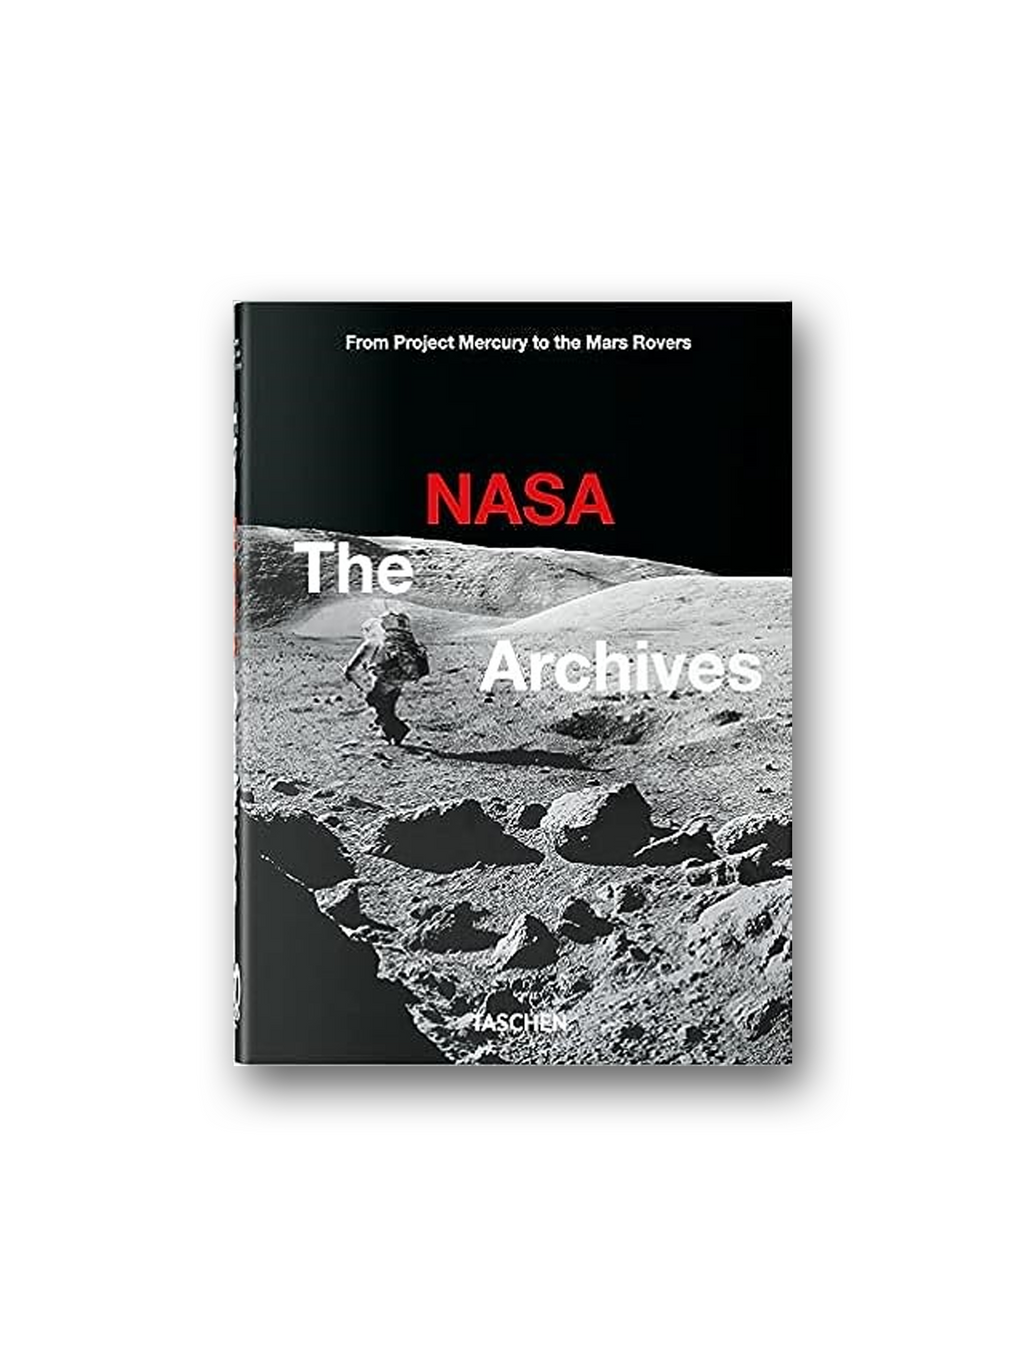 The Nasa Archives. 60 Years in Space. 40th Ed.